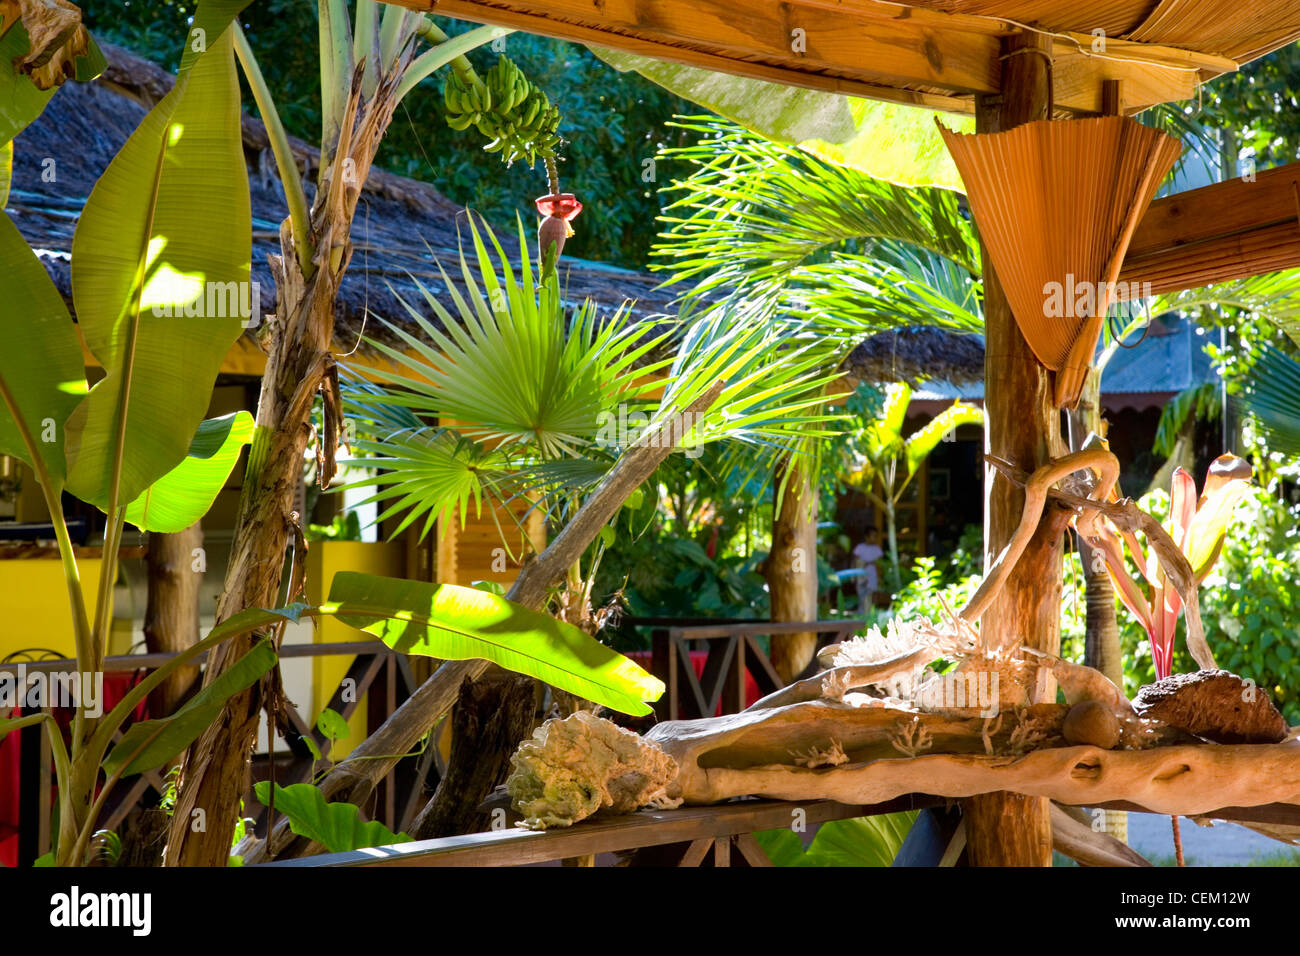 Anse Volbert, Praslin, Seychelles. Traditional restaurant decorated with tropical vegetation and local materials. Stock Photo